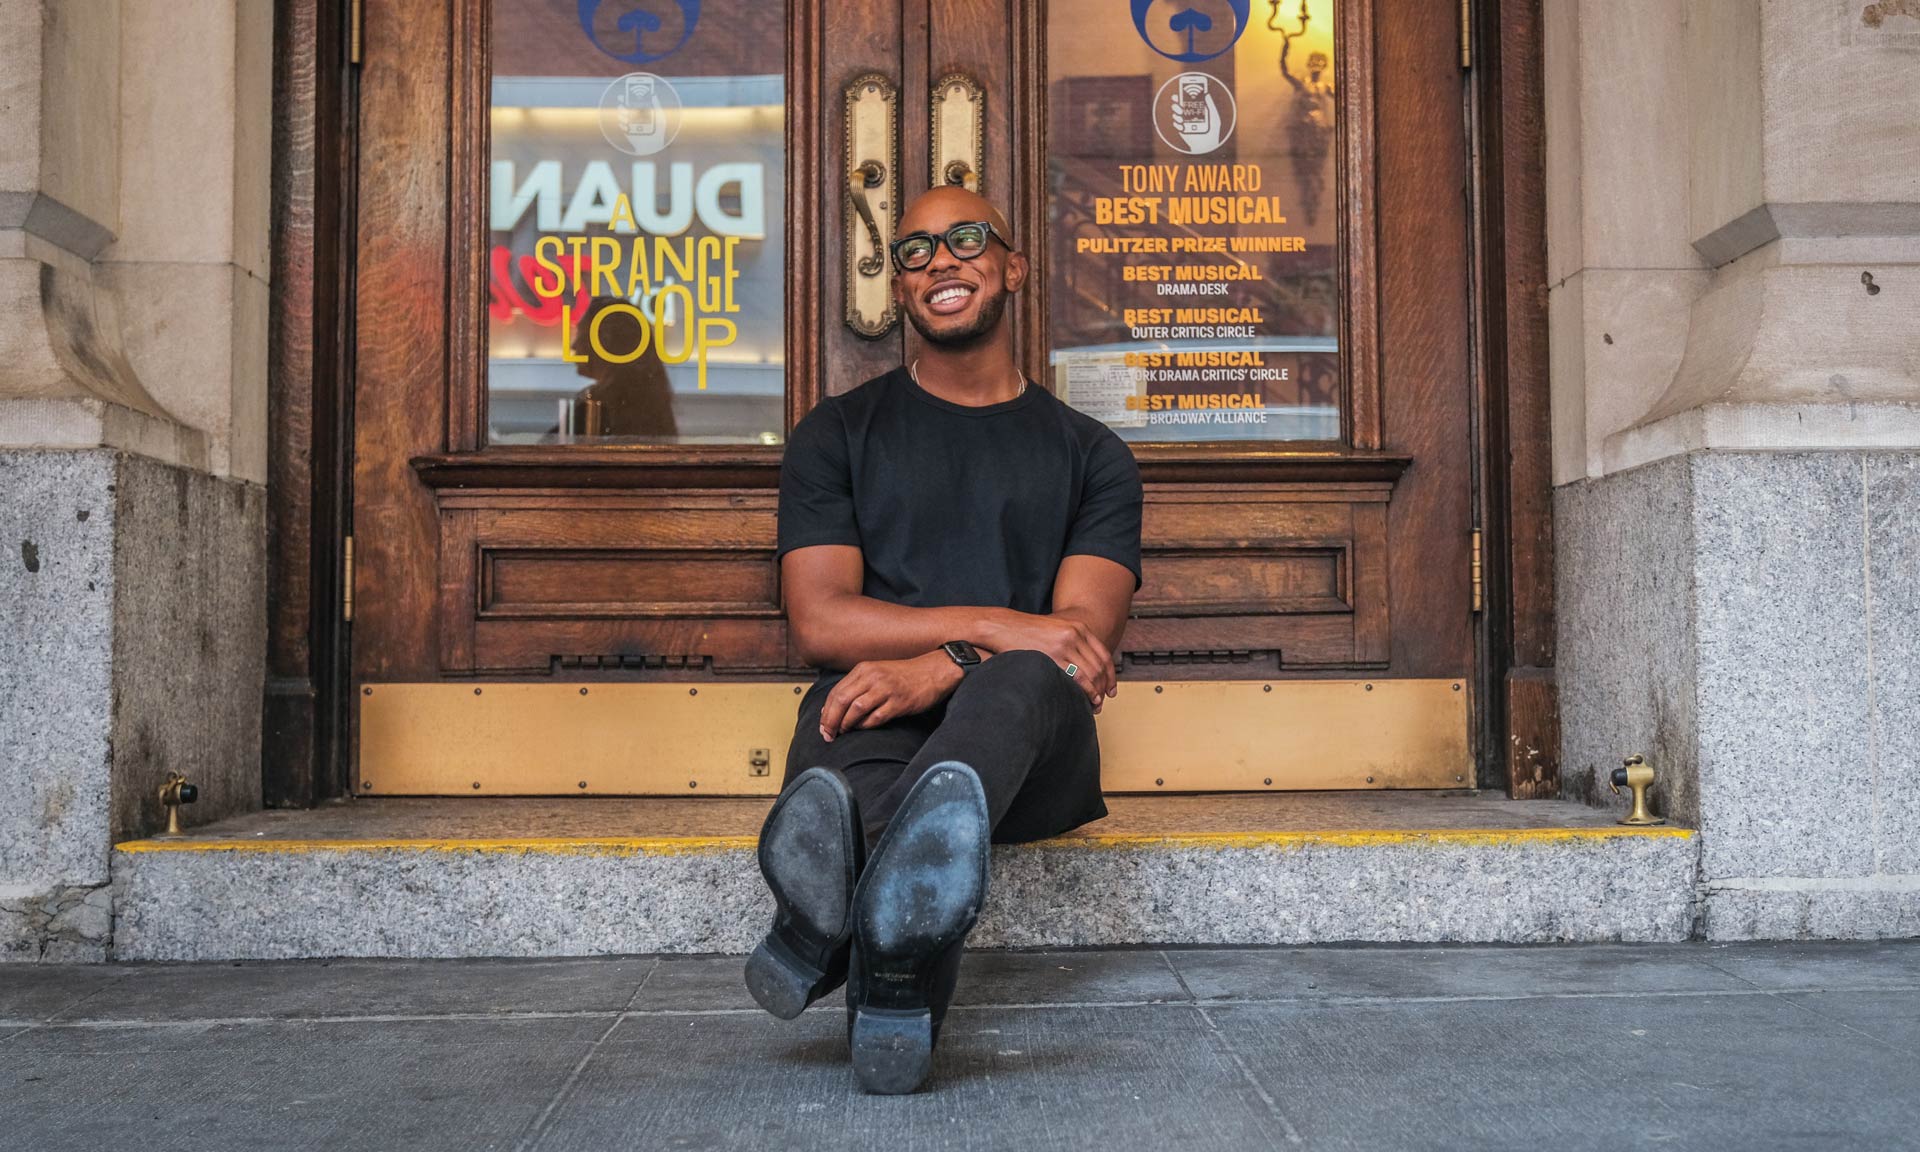 Scott enjoys a moment of calm on the steps of New York City’s Lyceum Theatre.